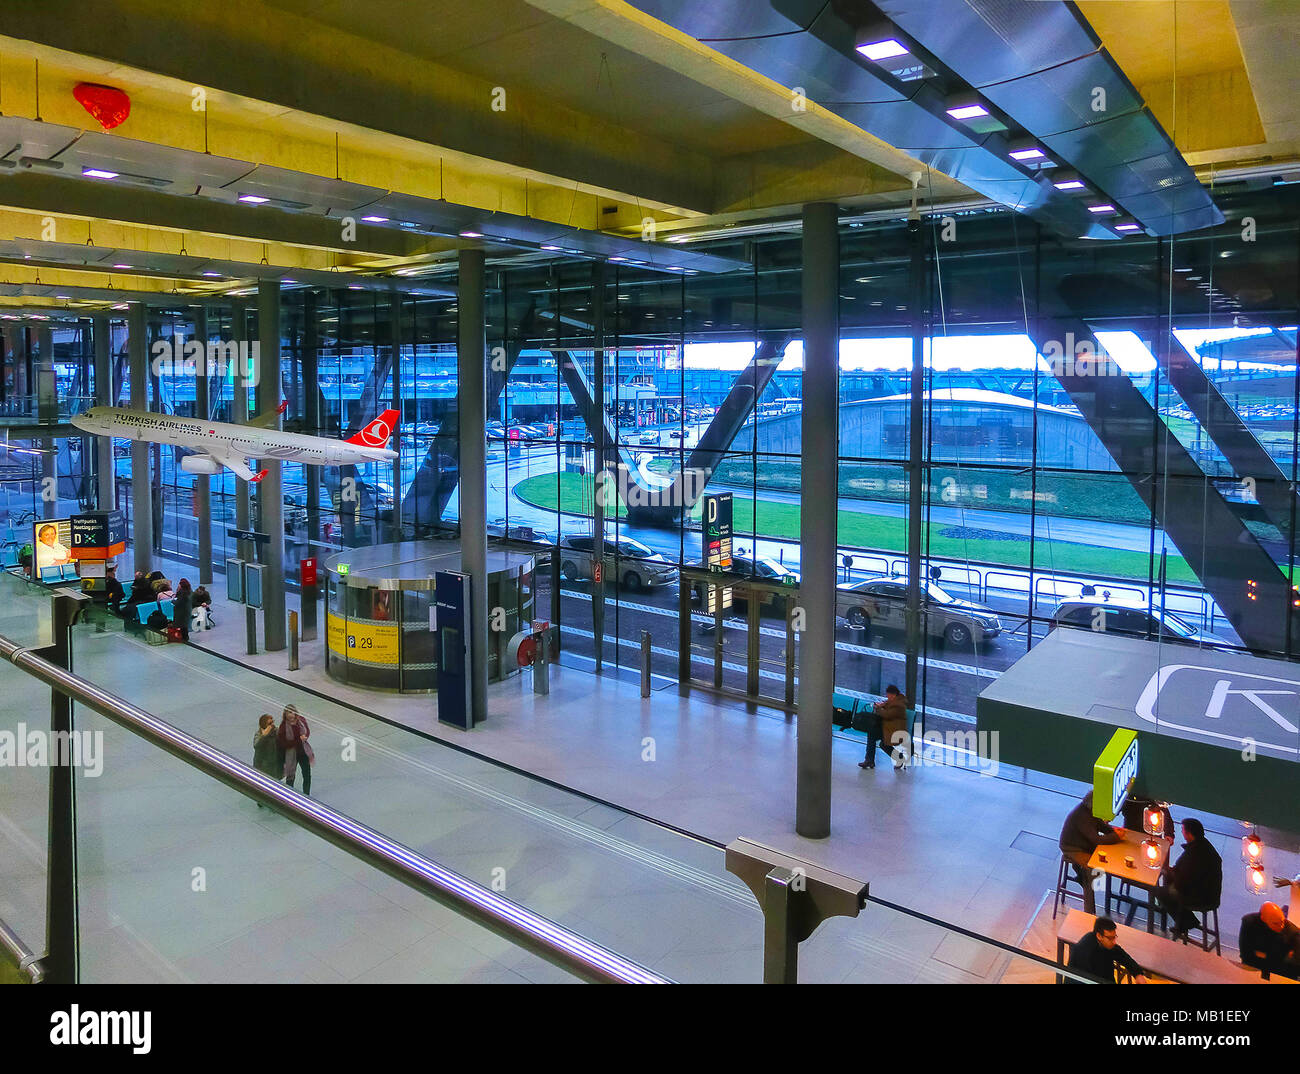 Cologne, Germany - December 12, 2017: The inside view of Cologne Bonn Airport. Stock Photo